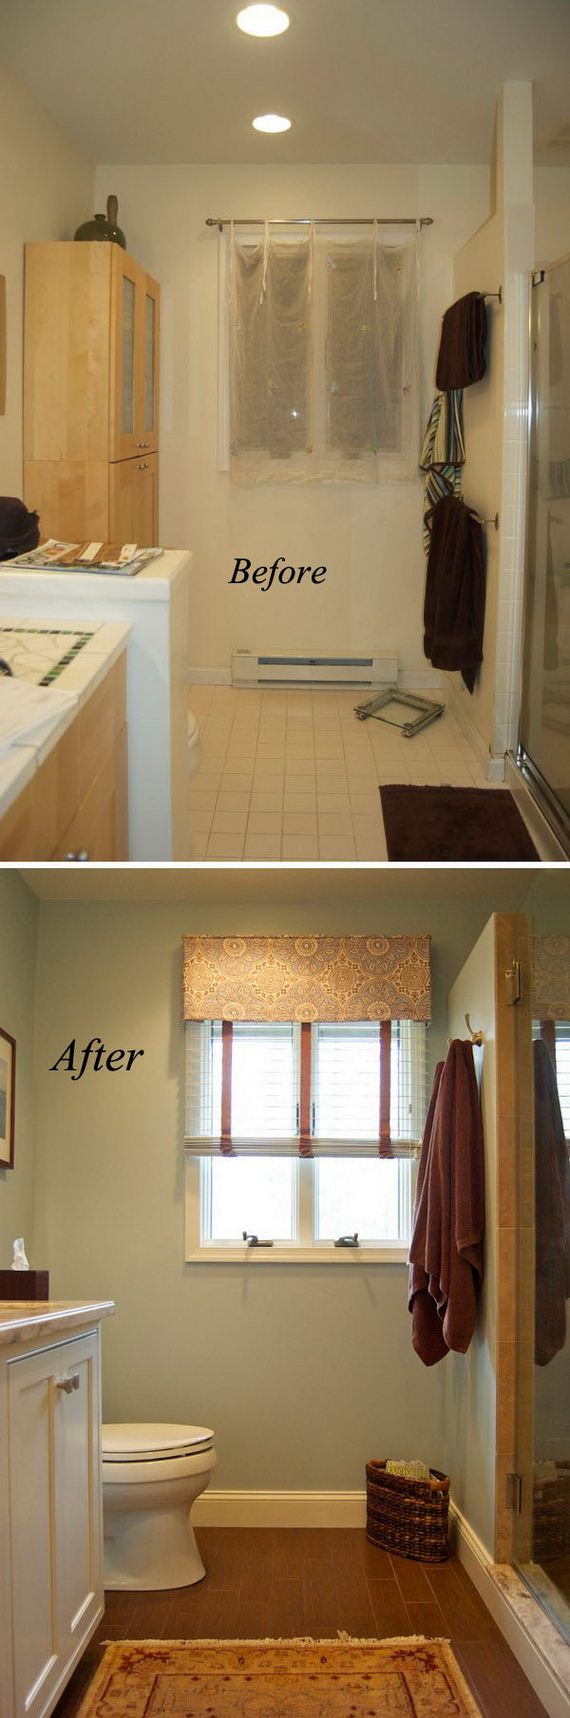 10-awesome-bathroom-makeovers